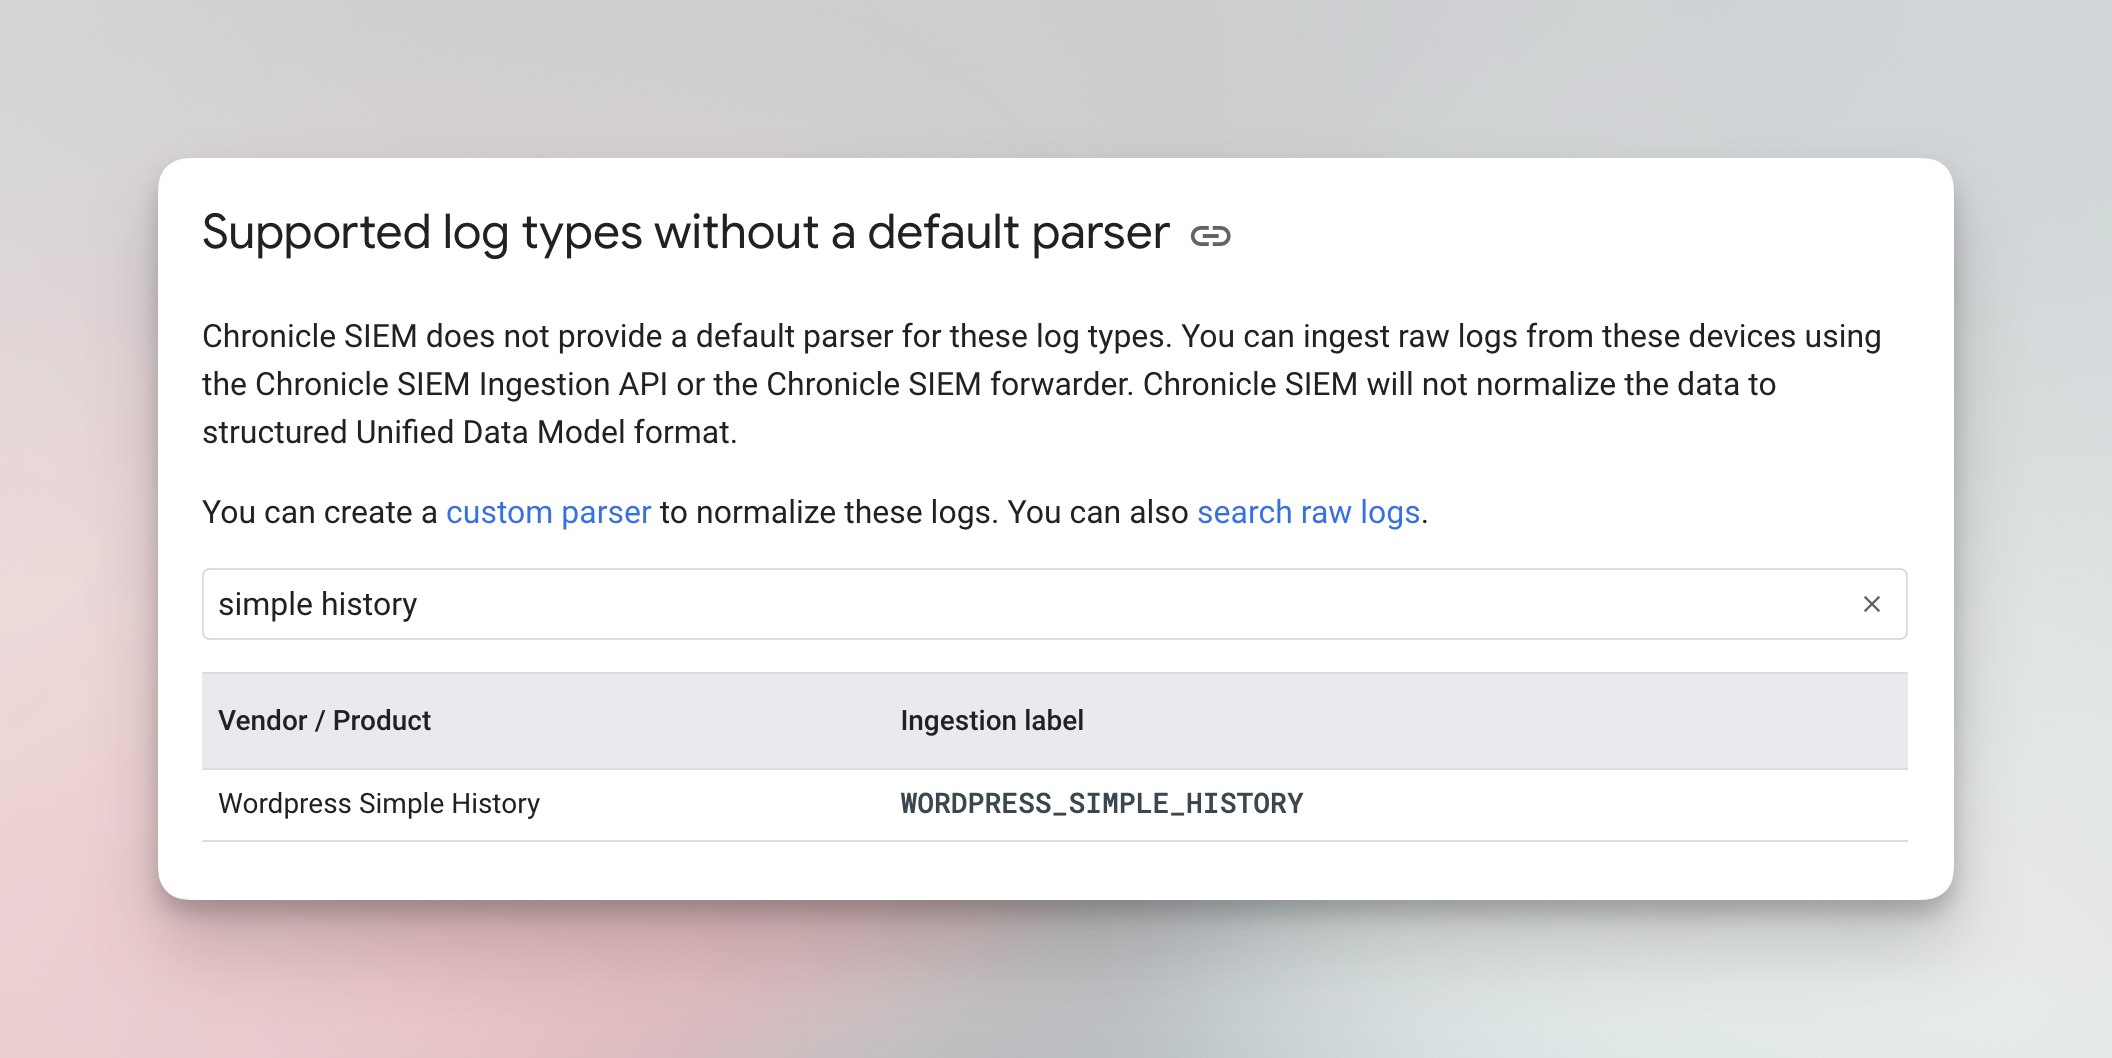 Google Chronicle Security supports parsing logs from Simple History